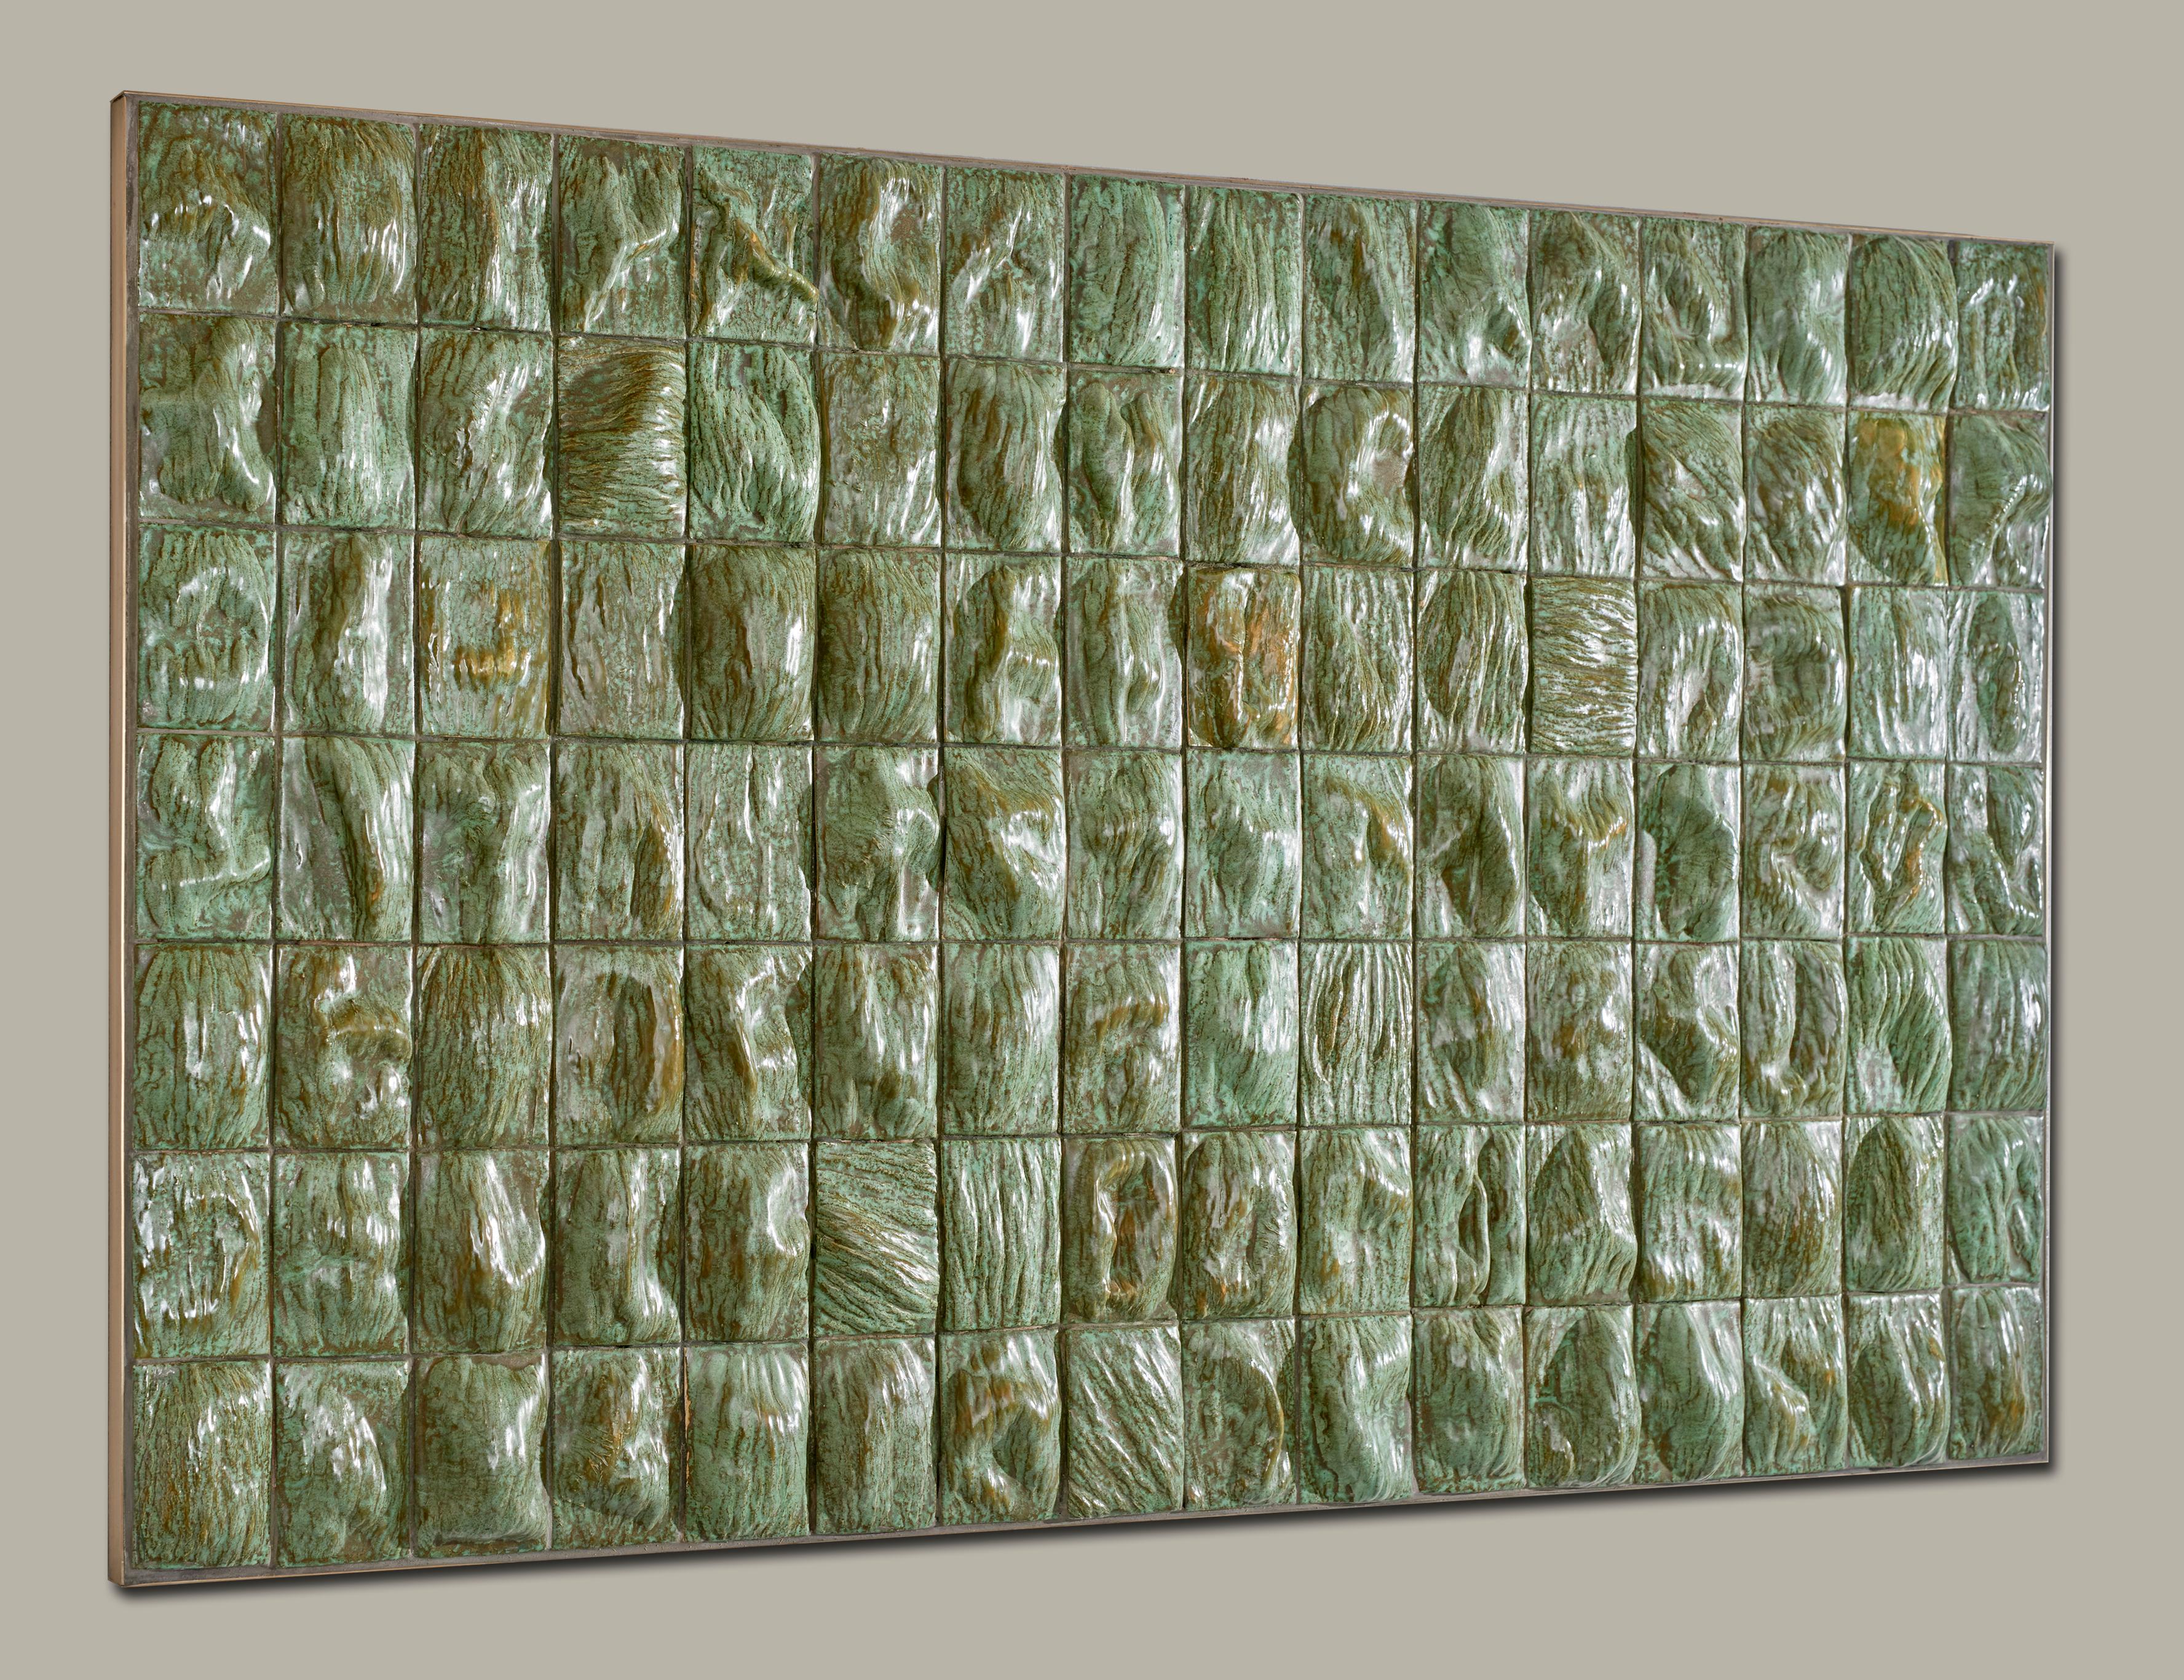 Melon Skin is a research on texture, materiality and surface depth. The Melon skin wall relief contains of 112 handcut ceramic tiles that give a sense of a melon's skin. Every tile is casted from a mold of a canary type of melon, and when taken out